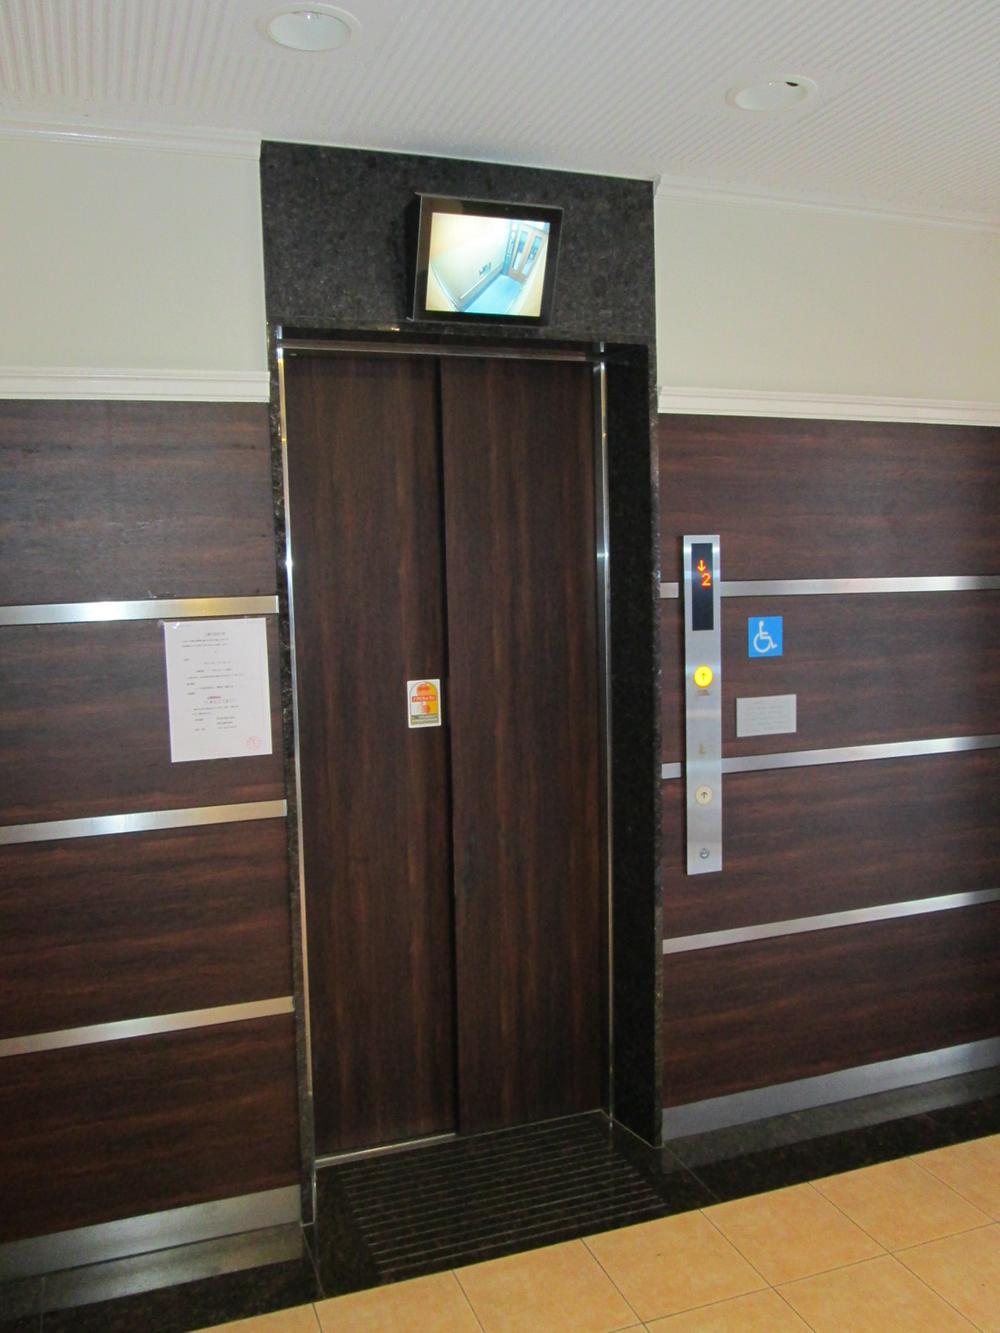 Other common areas. Security is also safe in the external monitor.